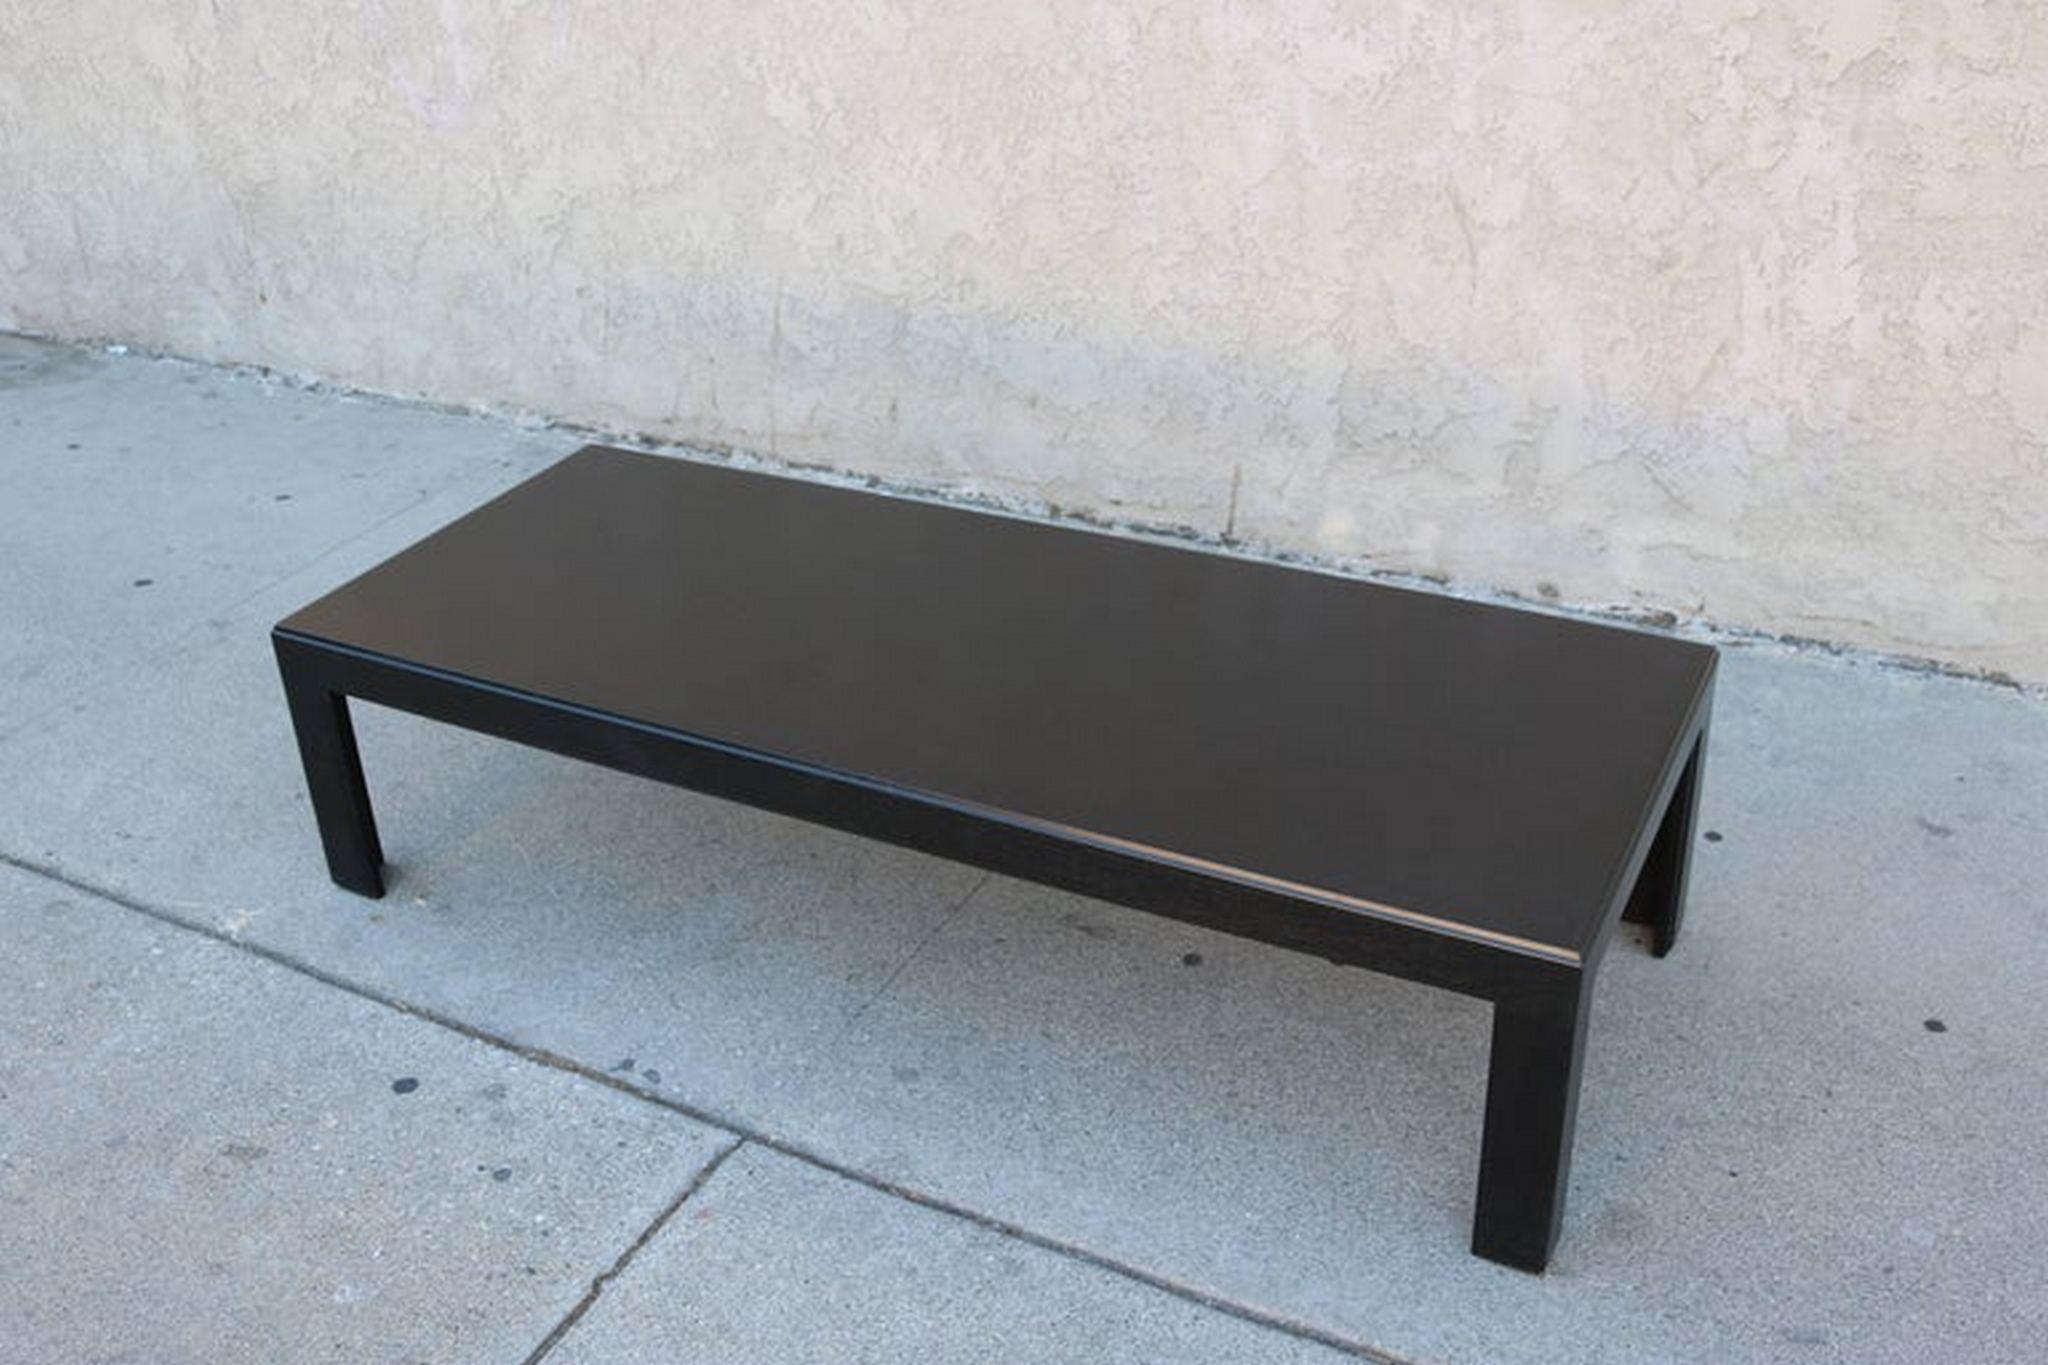 This ebonized coffee table features sleek lines and could be in any interiors.